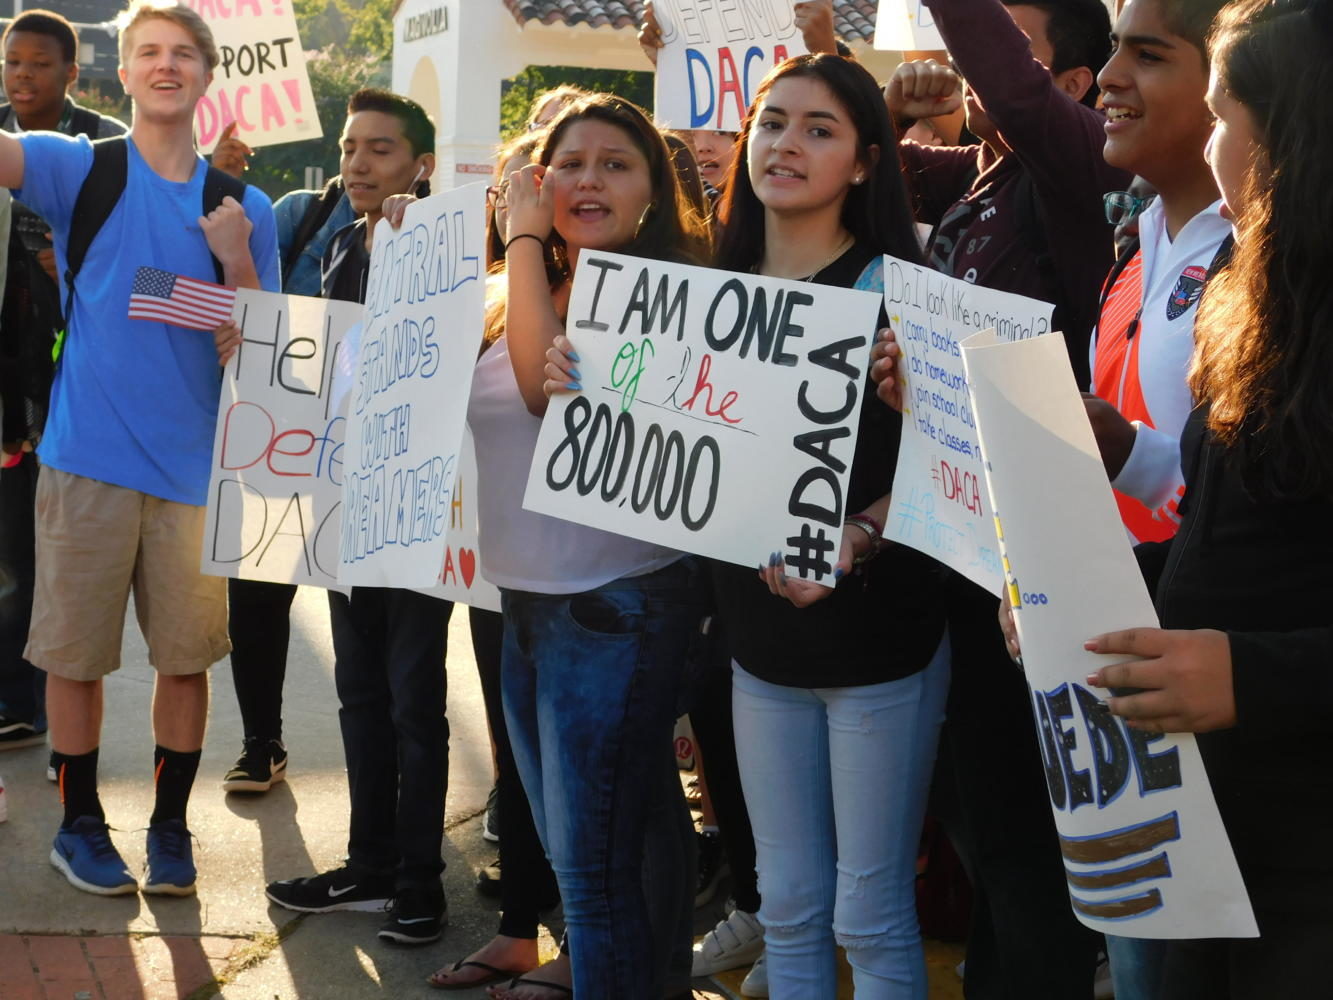 Students+stand+proud+with+their+signs+to+protest+the+Presidents+decision+to+dismantle+DACA%2C+a+program+that+helps+hundreds+of+thousands+of+undocumented+children.+